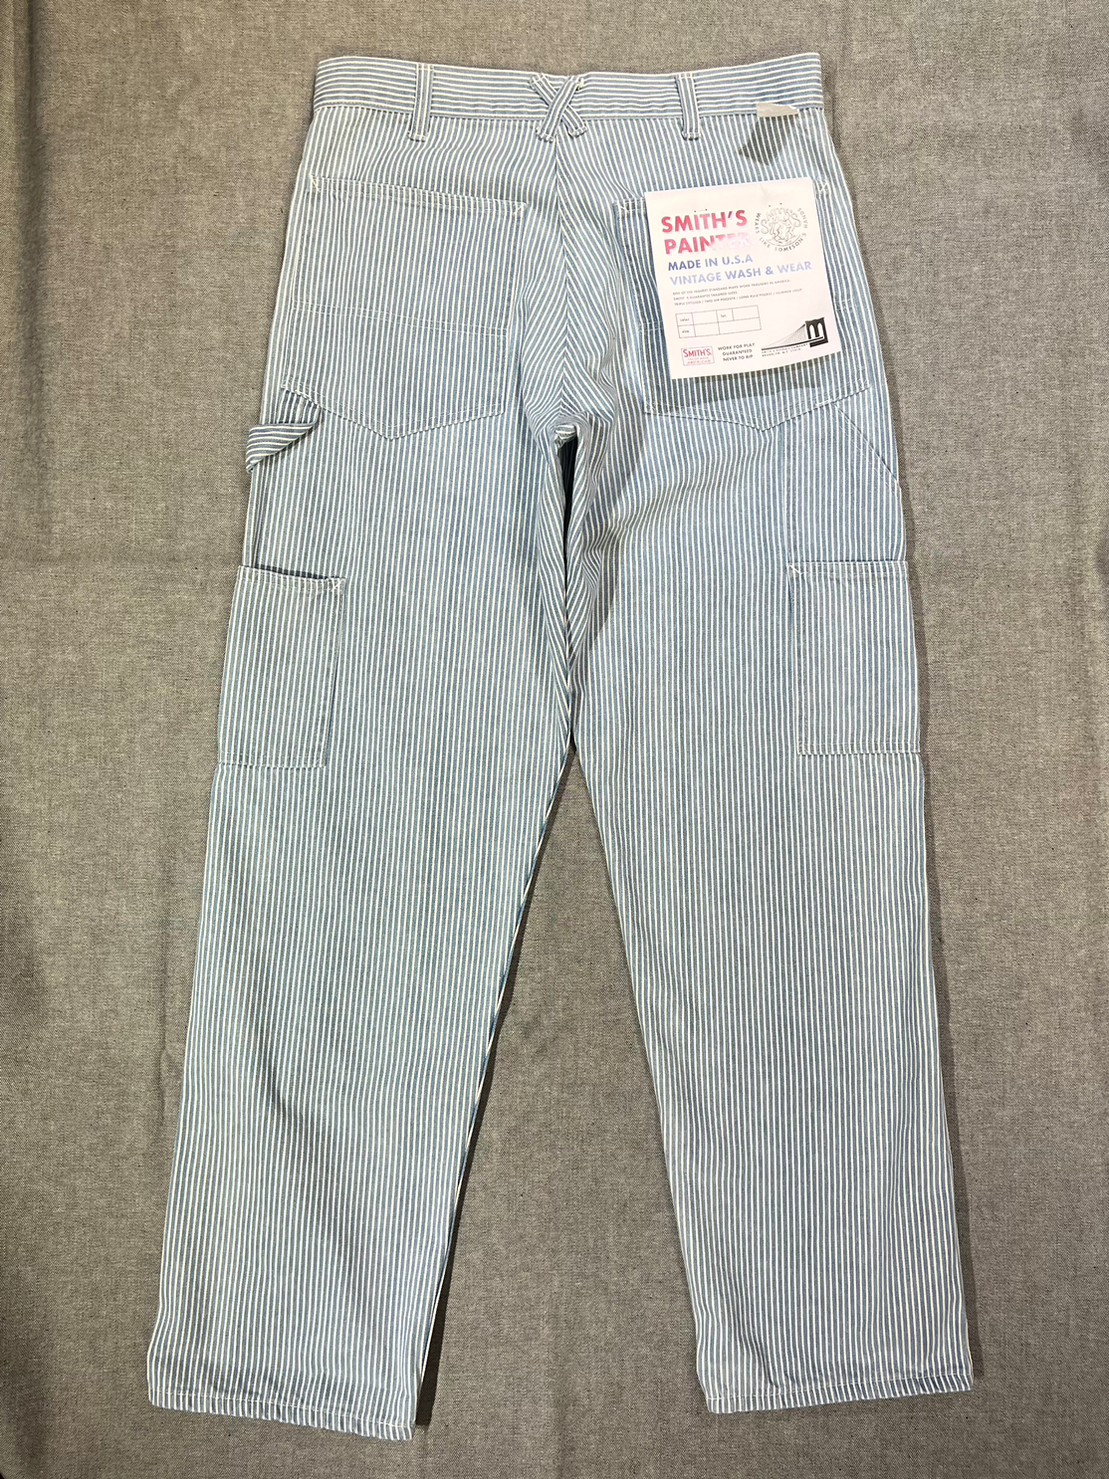 Hummingbirds'hill shop / SMITH'S PAINTER PANTS MADE IN USA FADE HICKORY